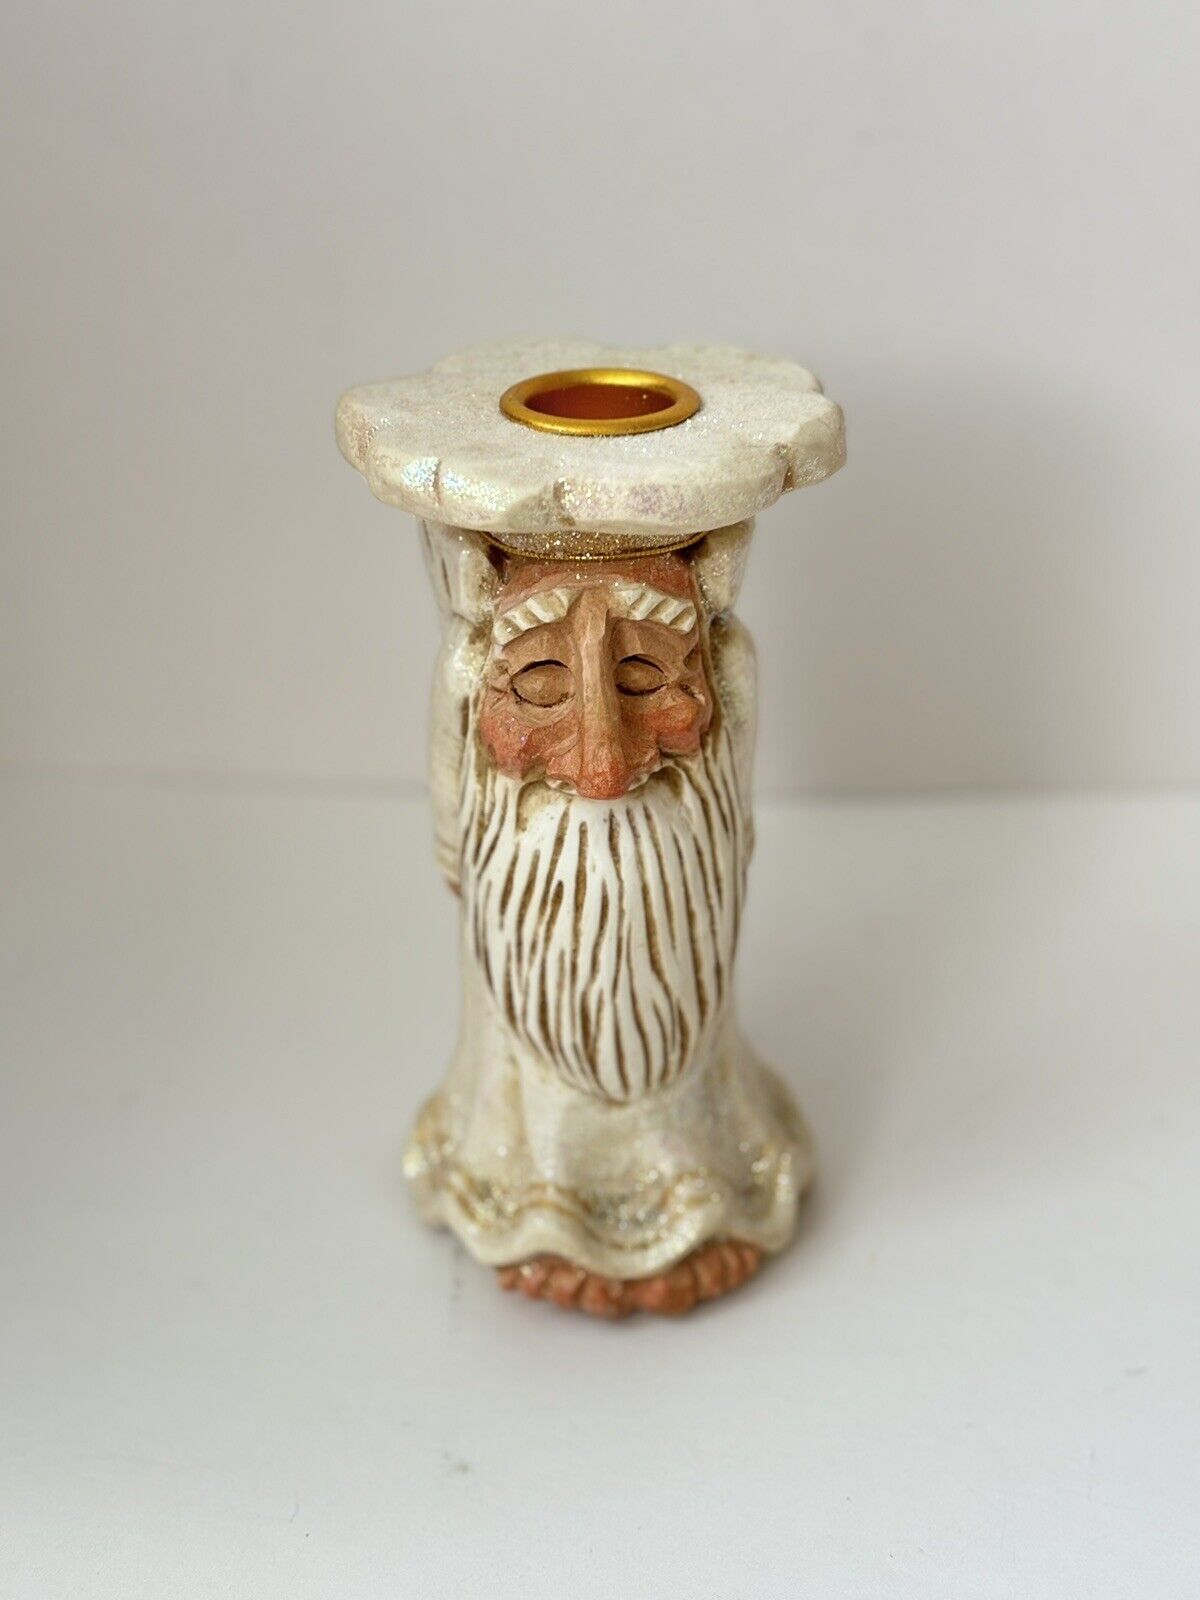 David Frykman VTG Candle Holder “All That Glitters Too” 5” Figurine 